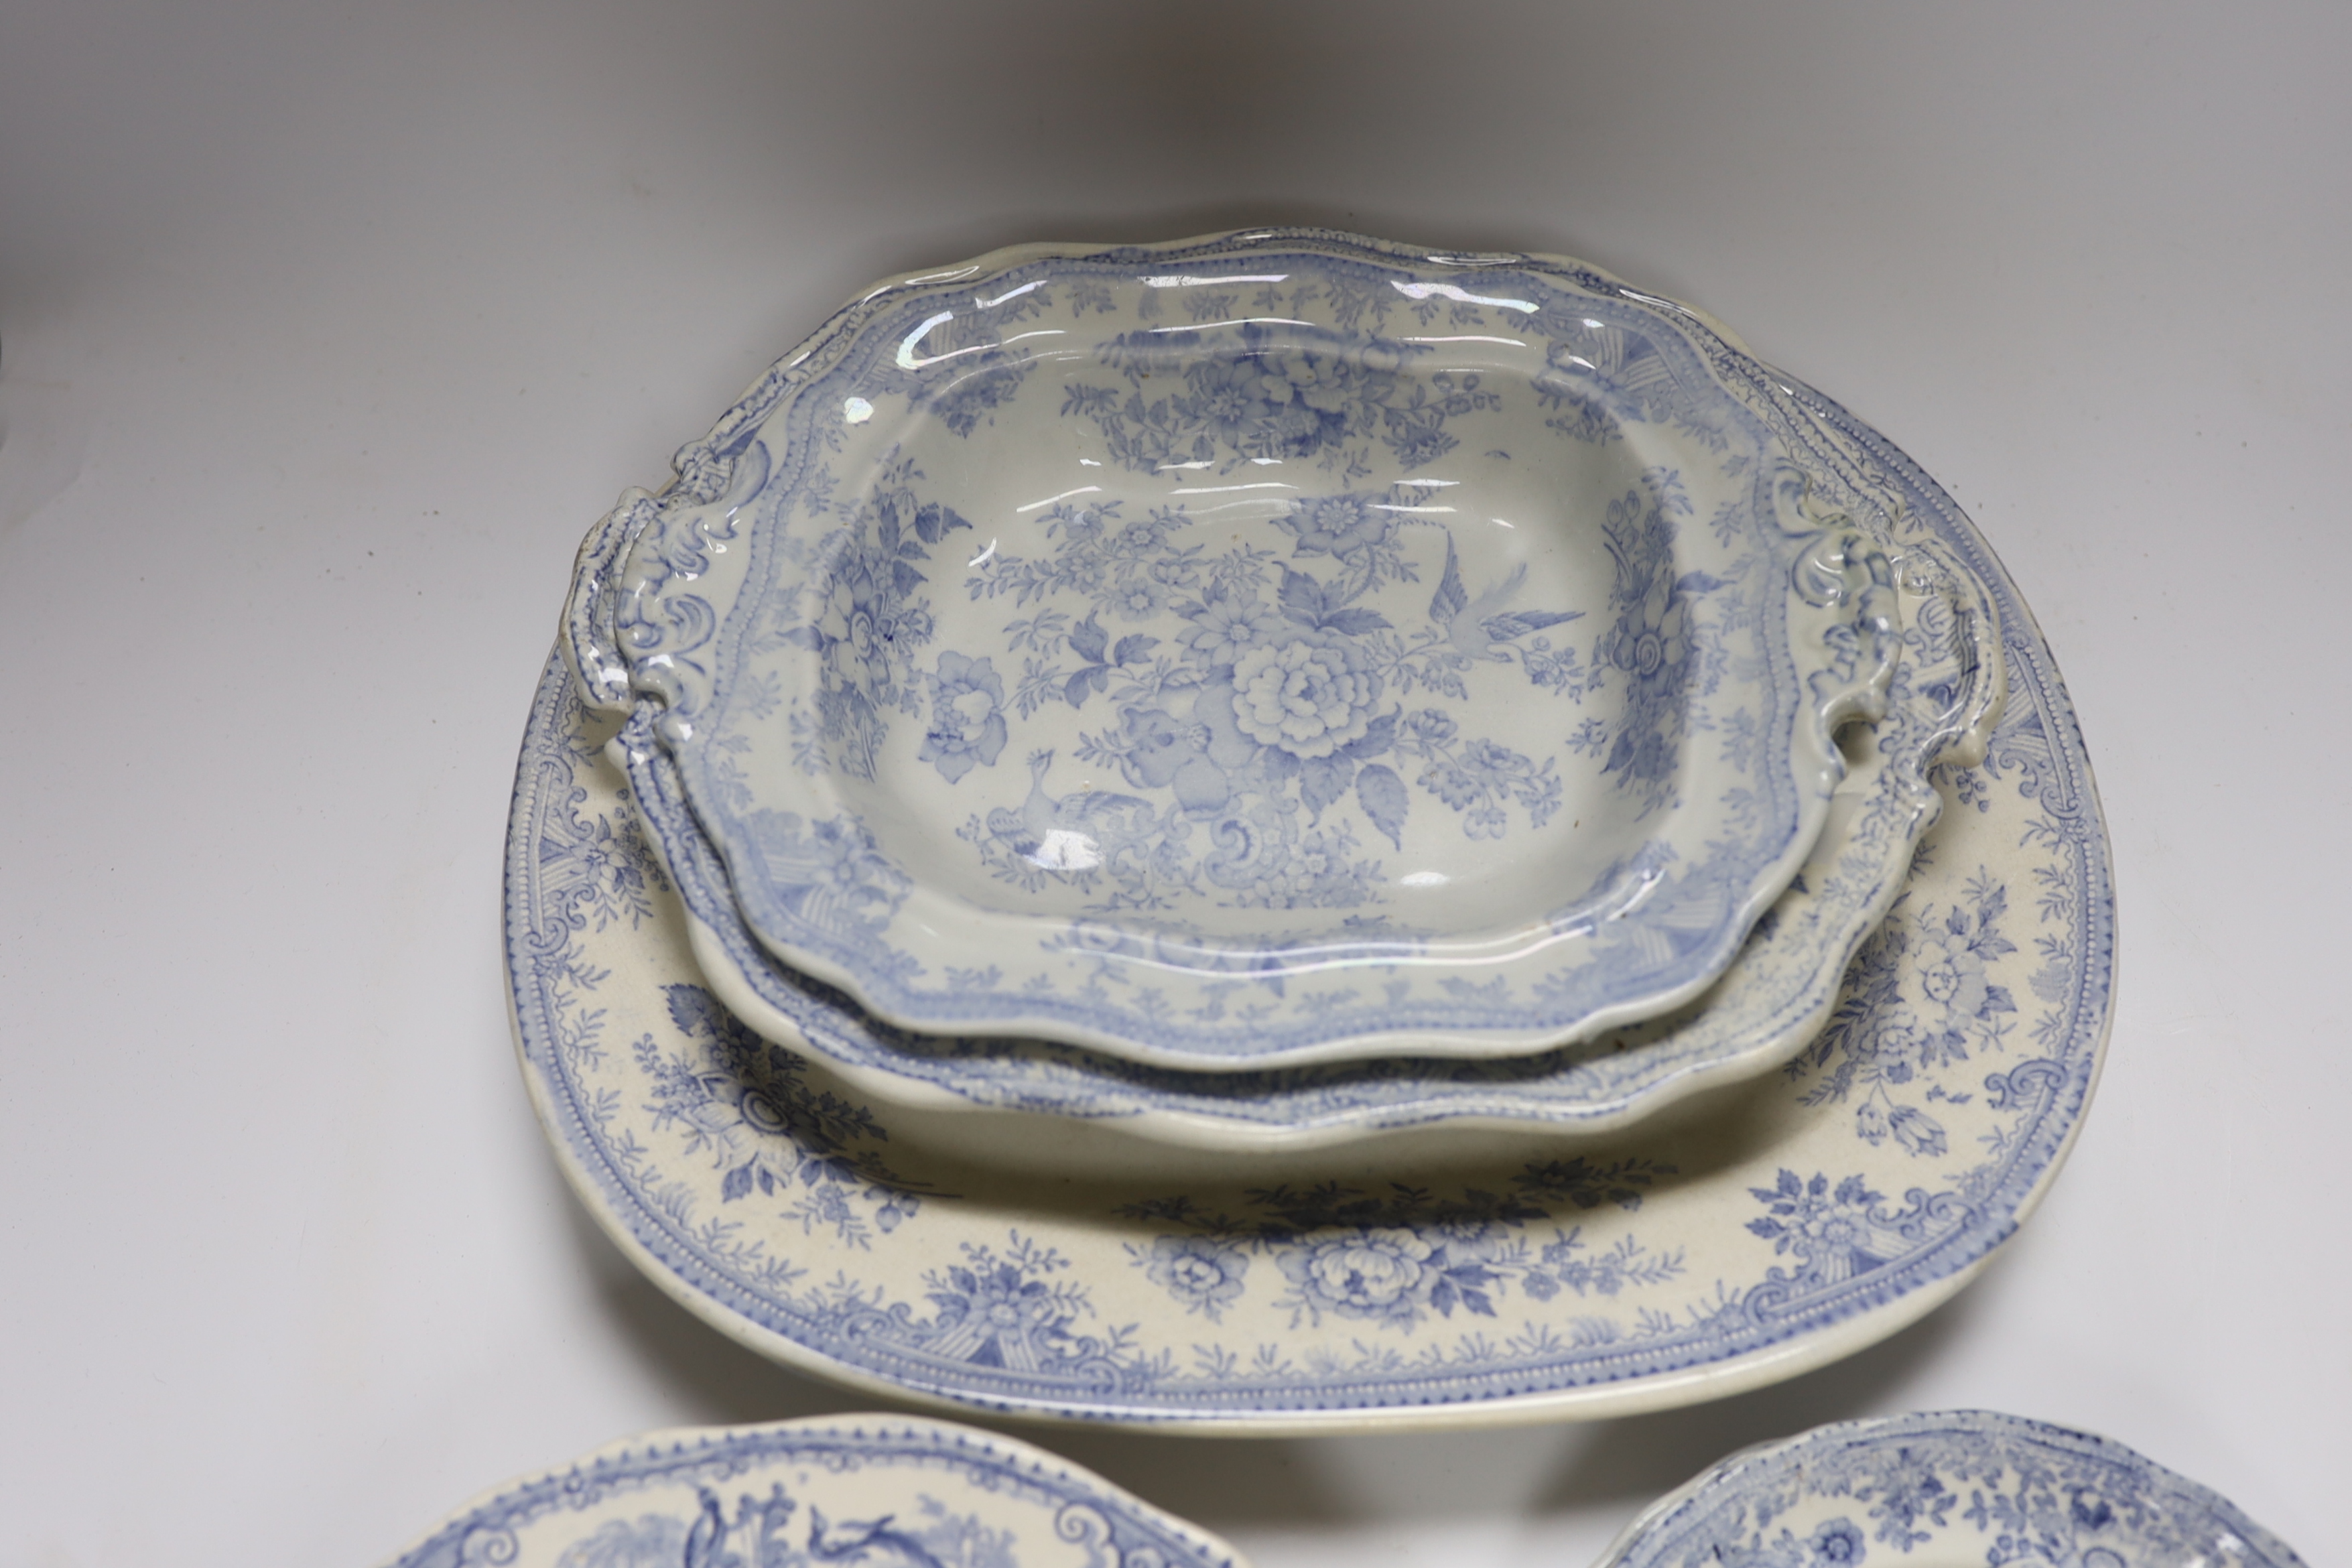 A collection of 19th century Staffordshire pottery blue and white dinner wares, (10 dishes in various sizes).